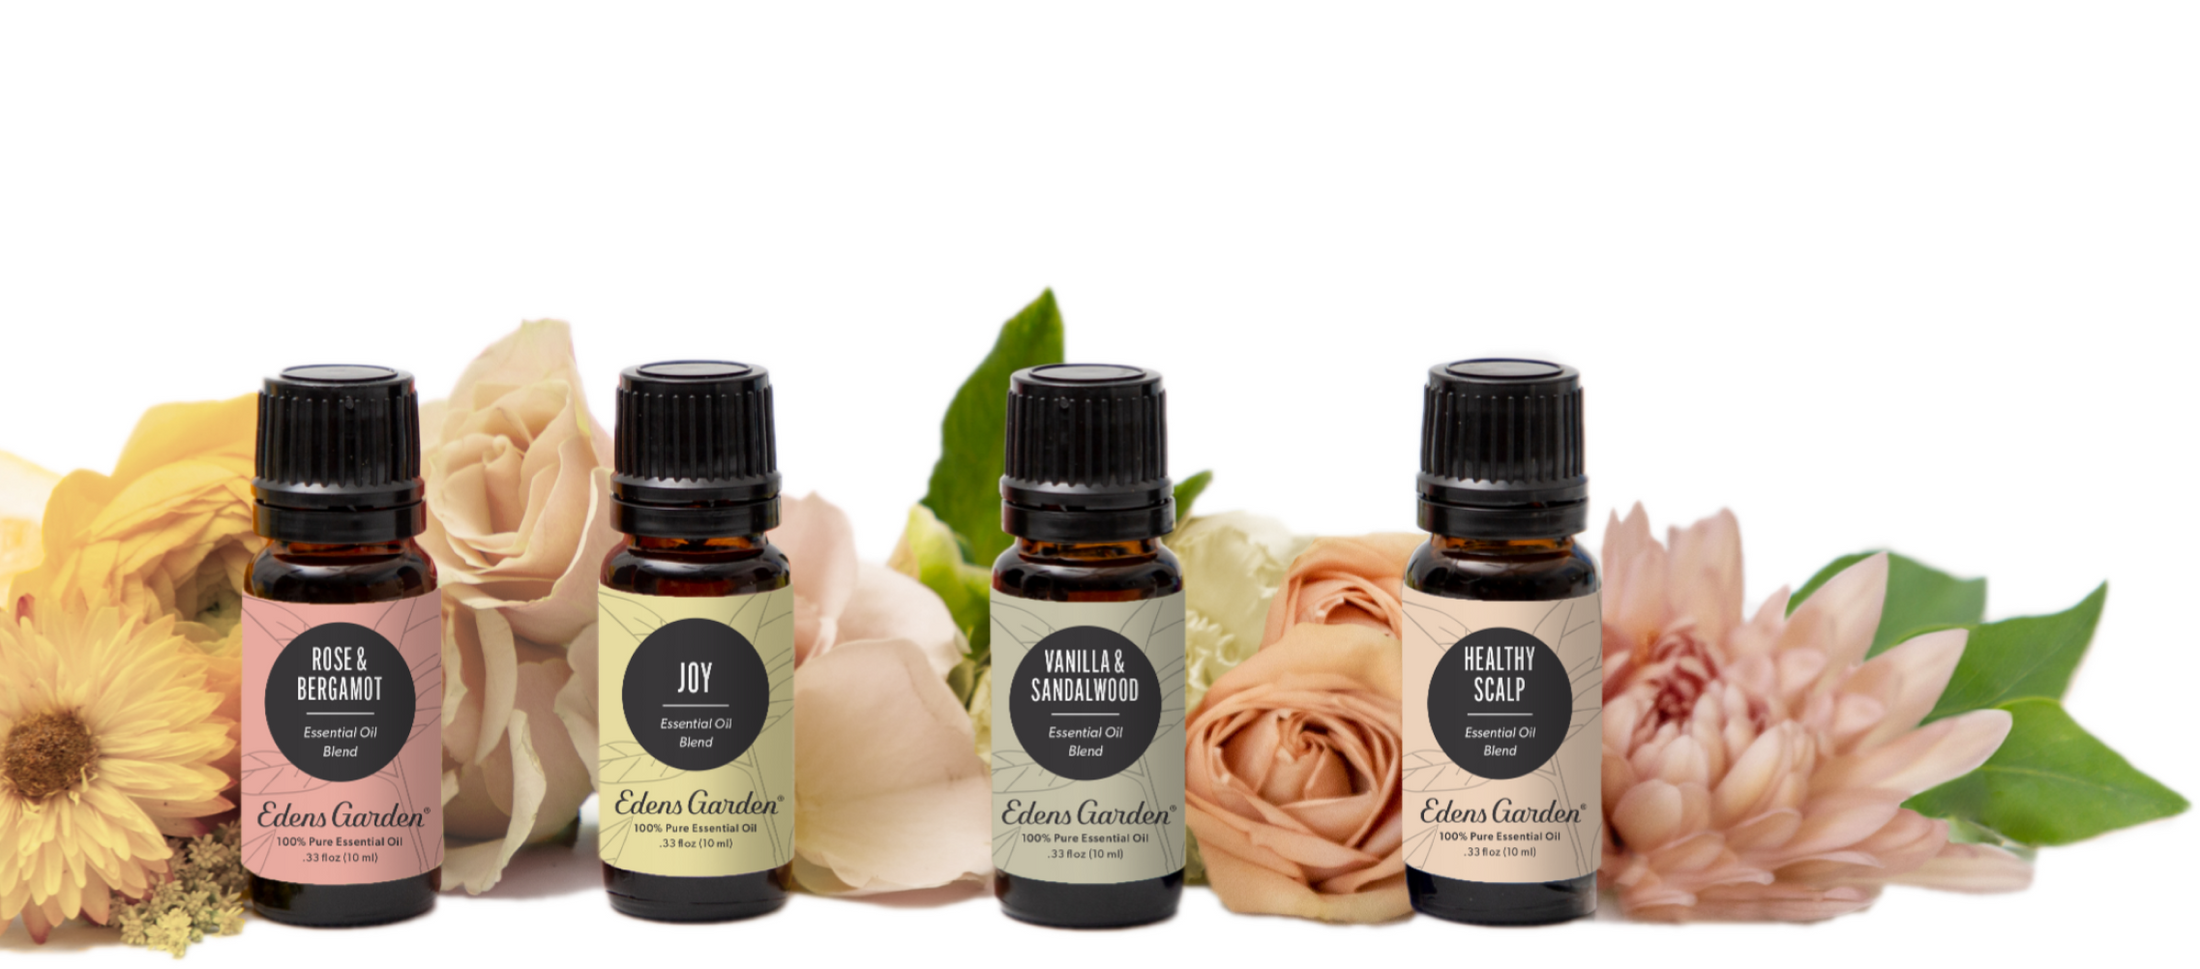 Edens Garden Essential Oils on X: Stay armed with a bug-evicition # essentialoil toolkit for a surprise bug visit like Callie Sip ! 🌿 🧰  💂‍♂️Guardian 🤧 Stuffy Nose & Congestion Relief 😷